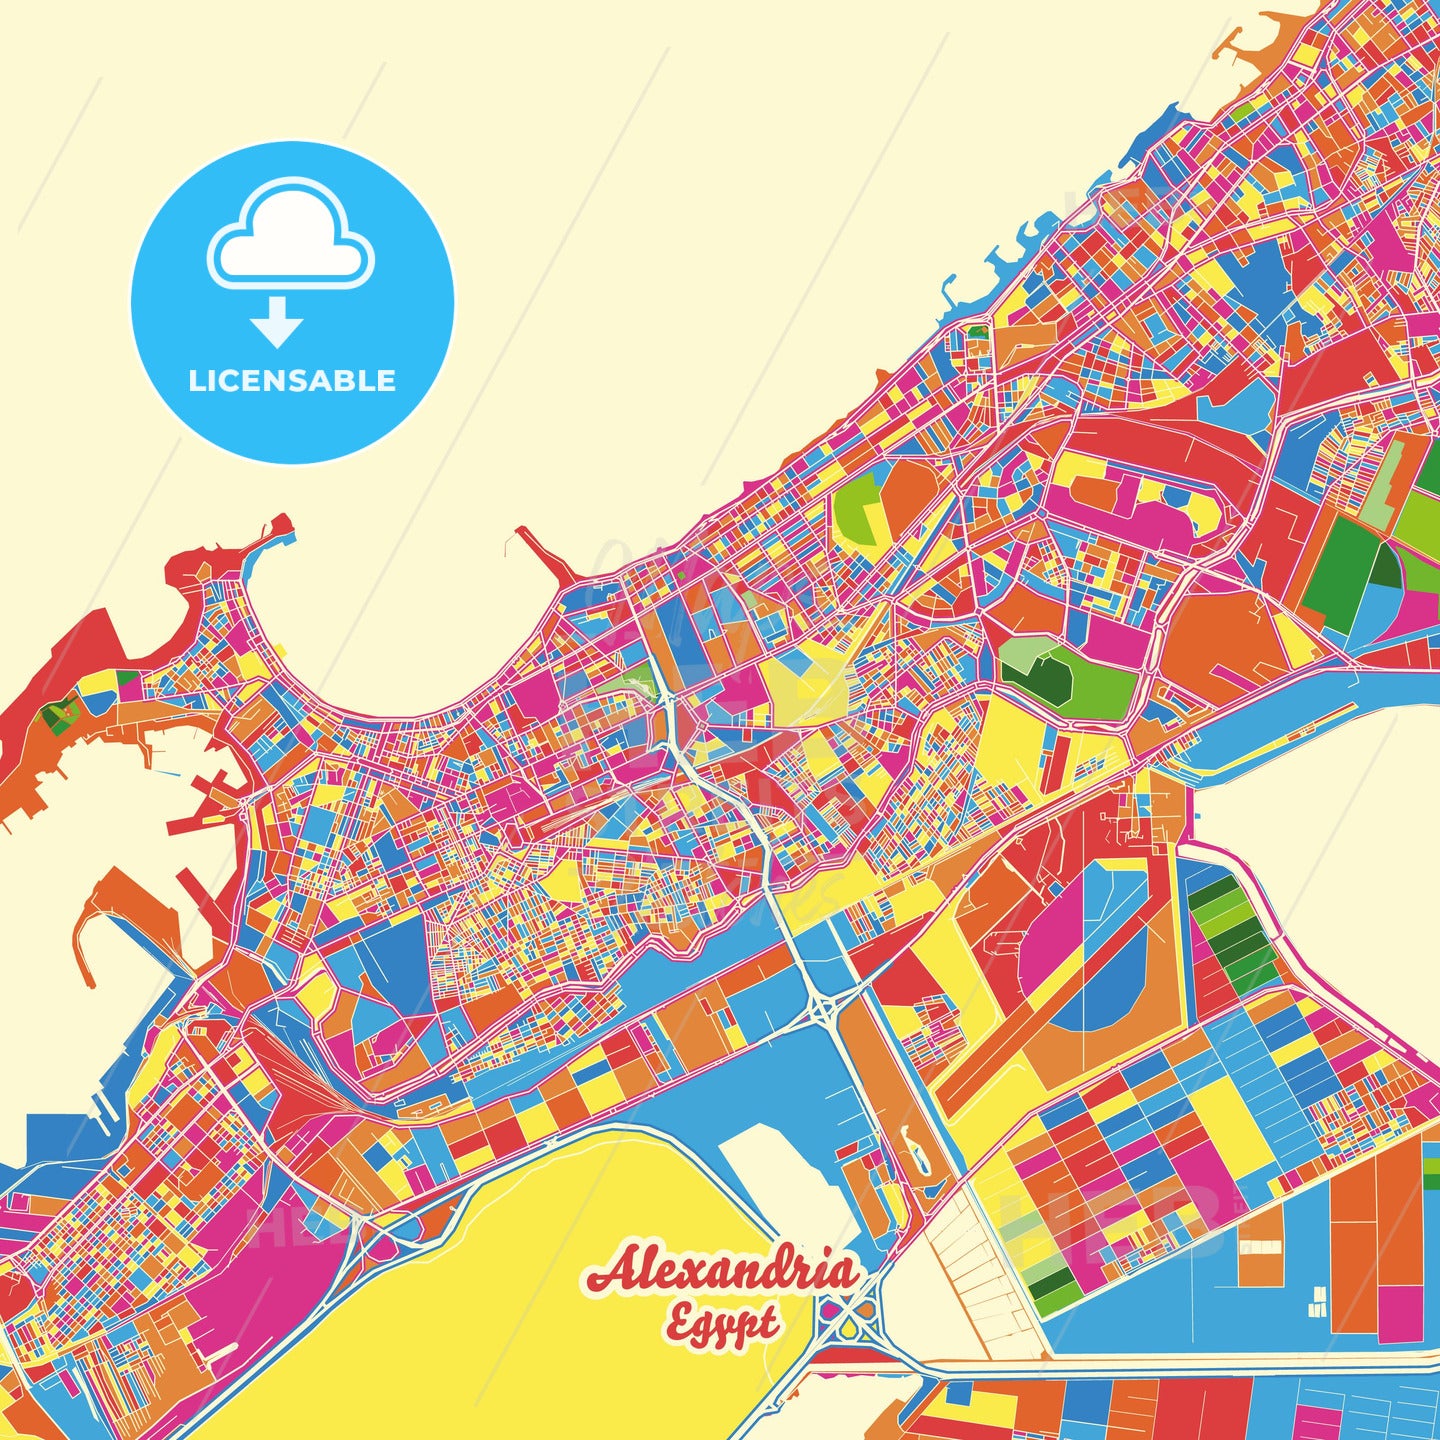 Alexandria, Egypt Crazy Colorful Street Map Poster Template - HEBSTREITS Sketches